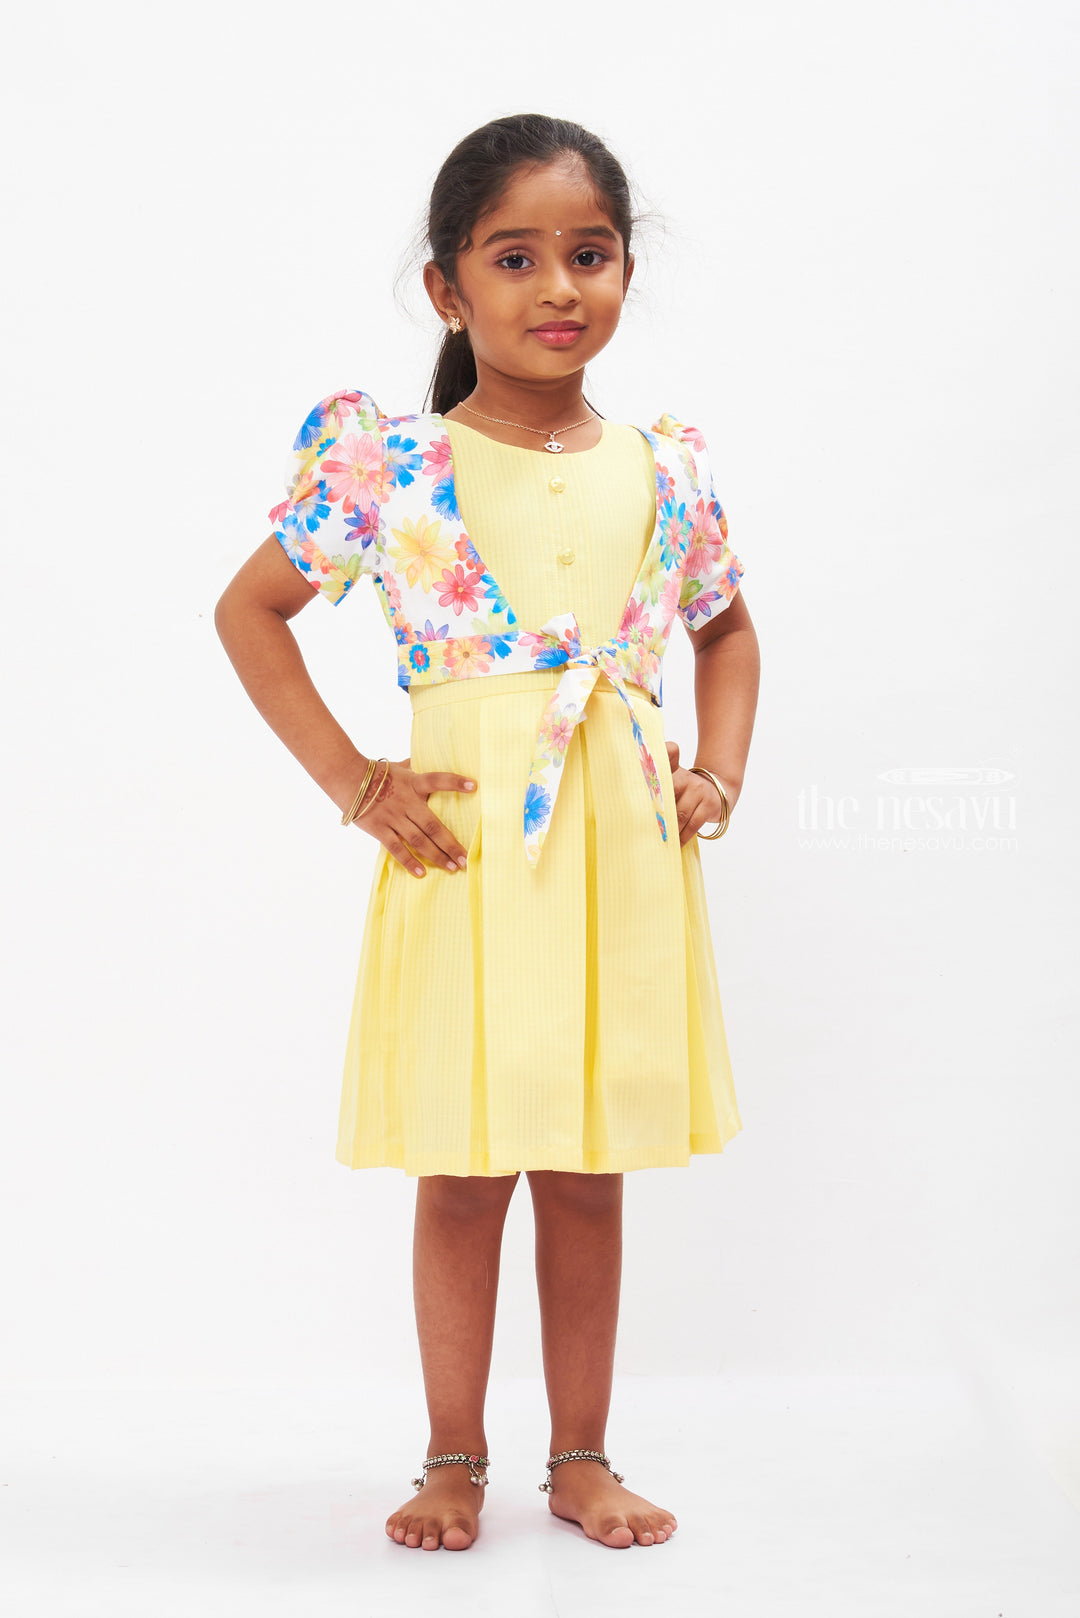 The Nesavu Girls Cotton Frock Sunny Delight Yellow Cotton Frock with Floral Jacket for Girls Nesavu 22 (4Y) / Yellow / Cotton GFC1259B-22 Girls Yellow Dress with Colorful Floral Jacket | Cheerful Summer Wear | The Nesavu